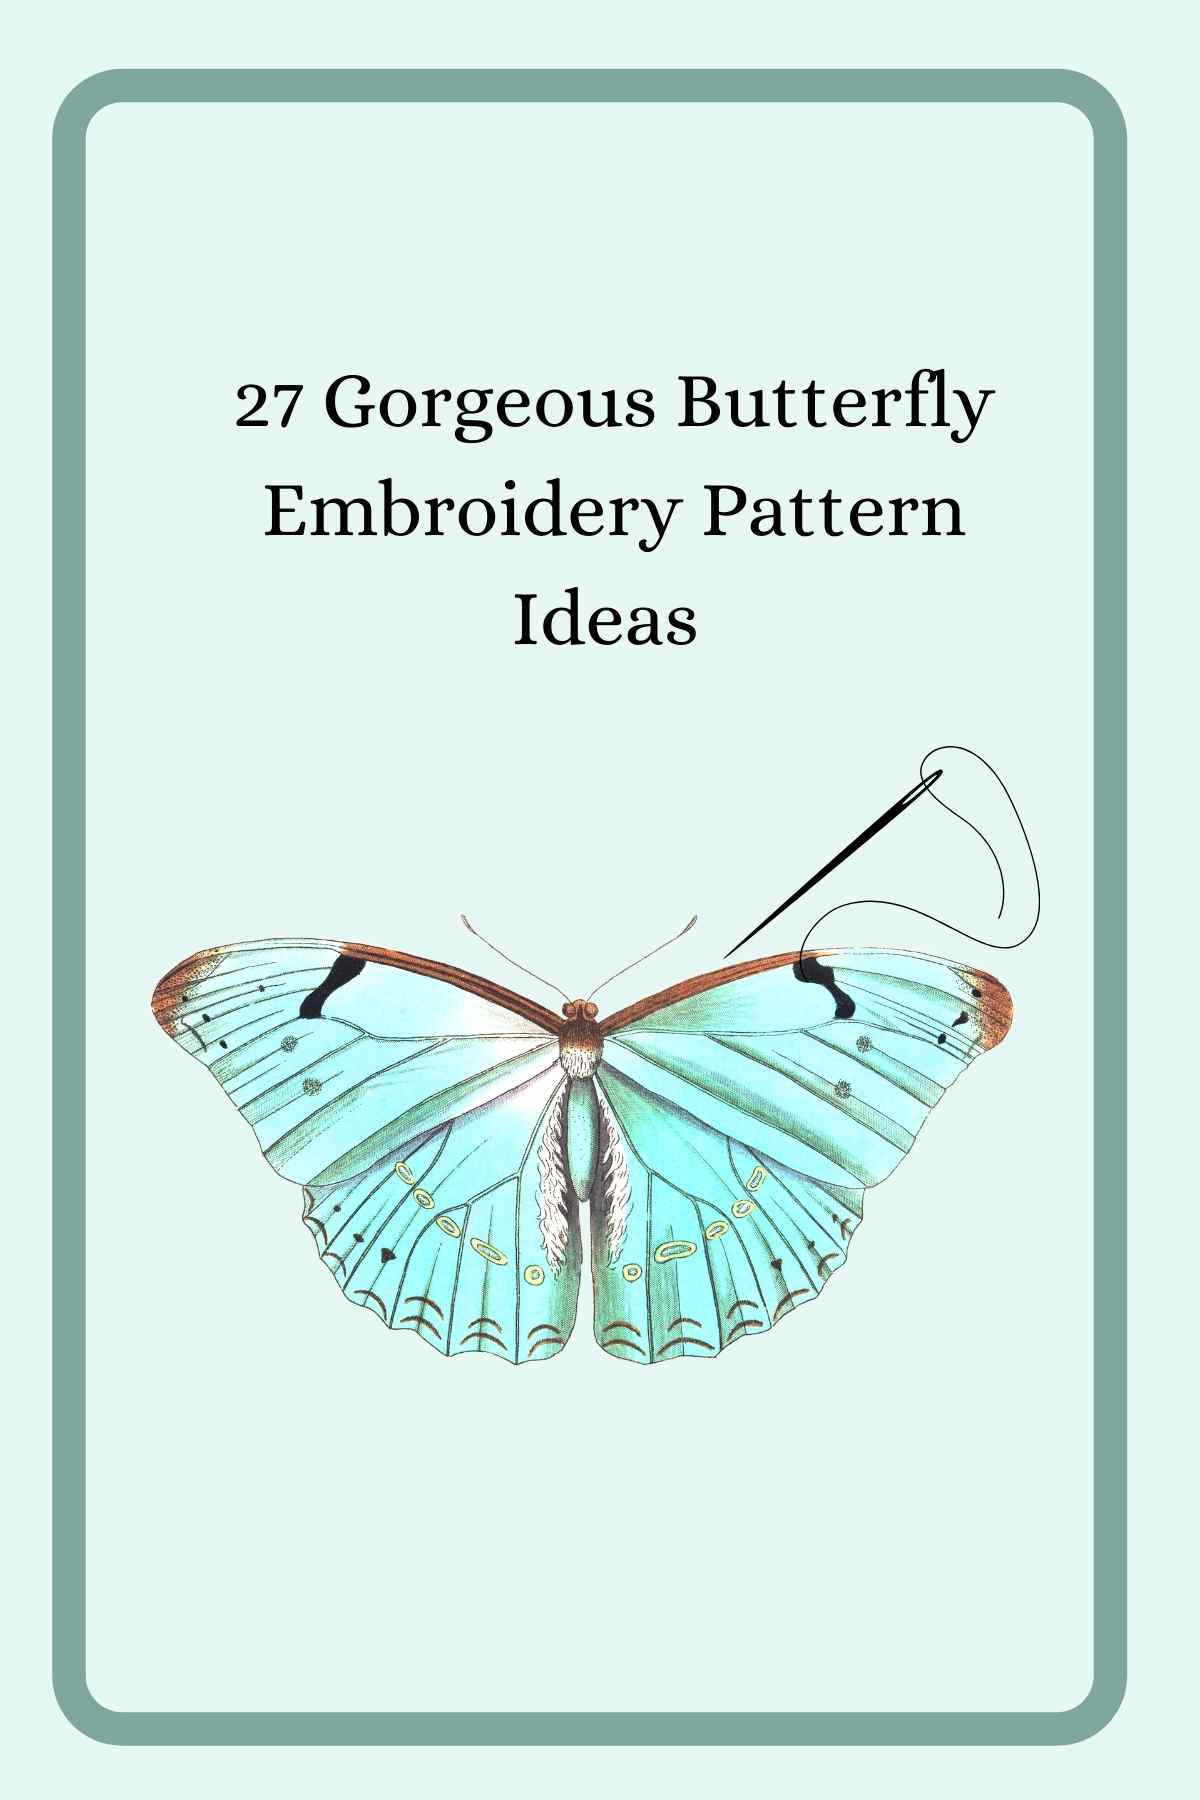 Butterfly embroidery patterns